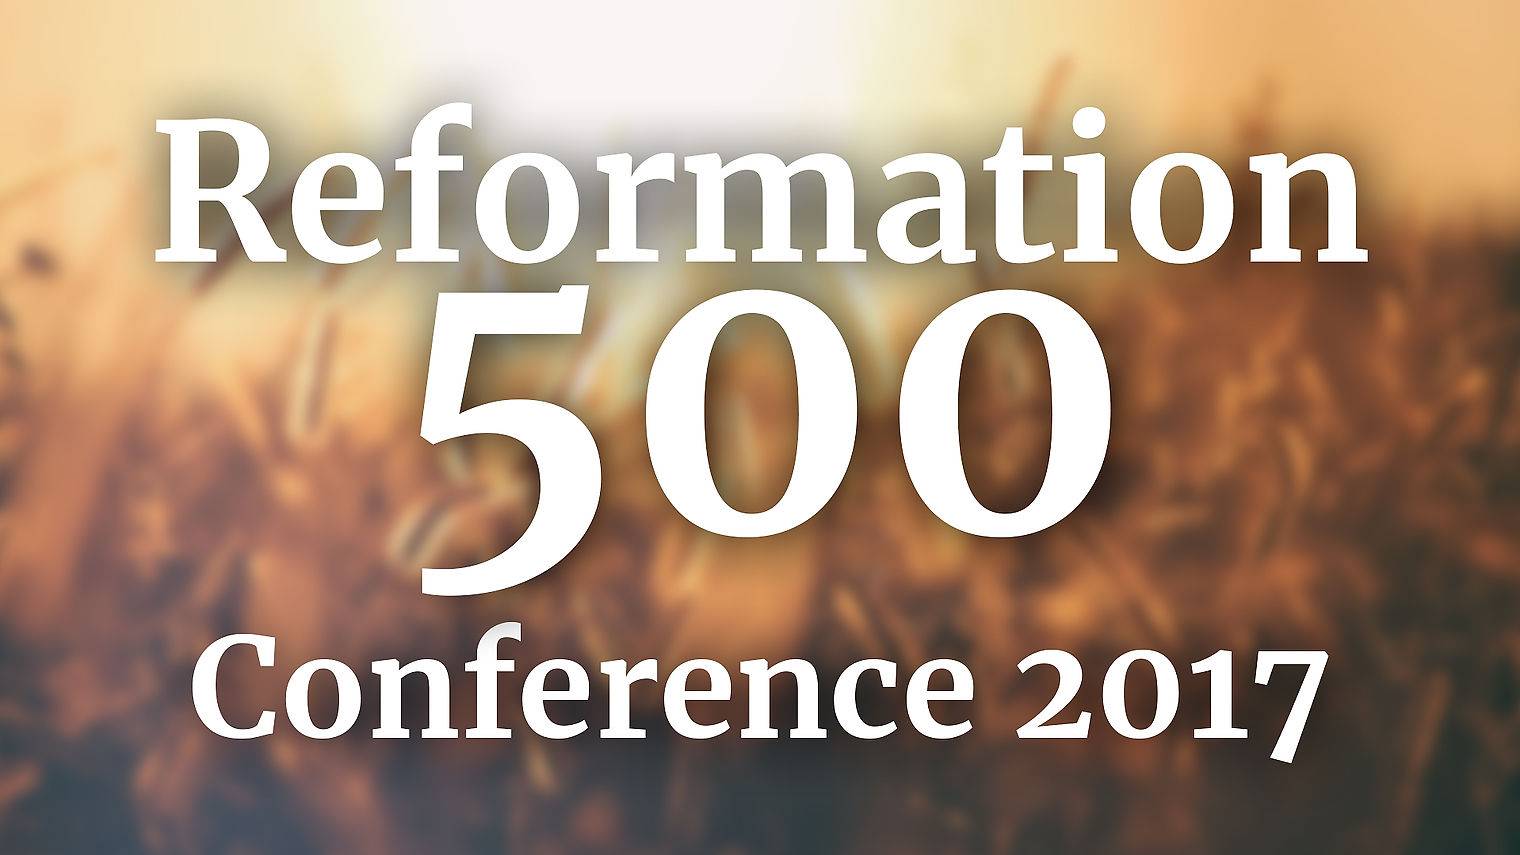 Reformation 500 Conference - 2017